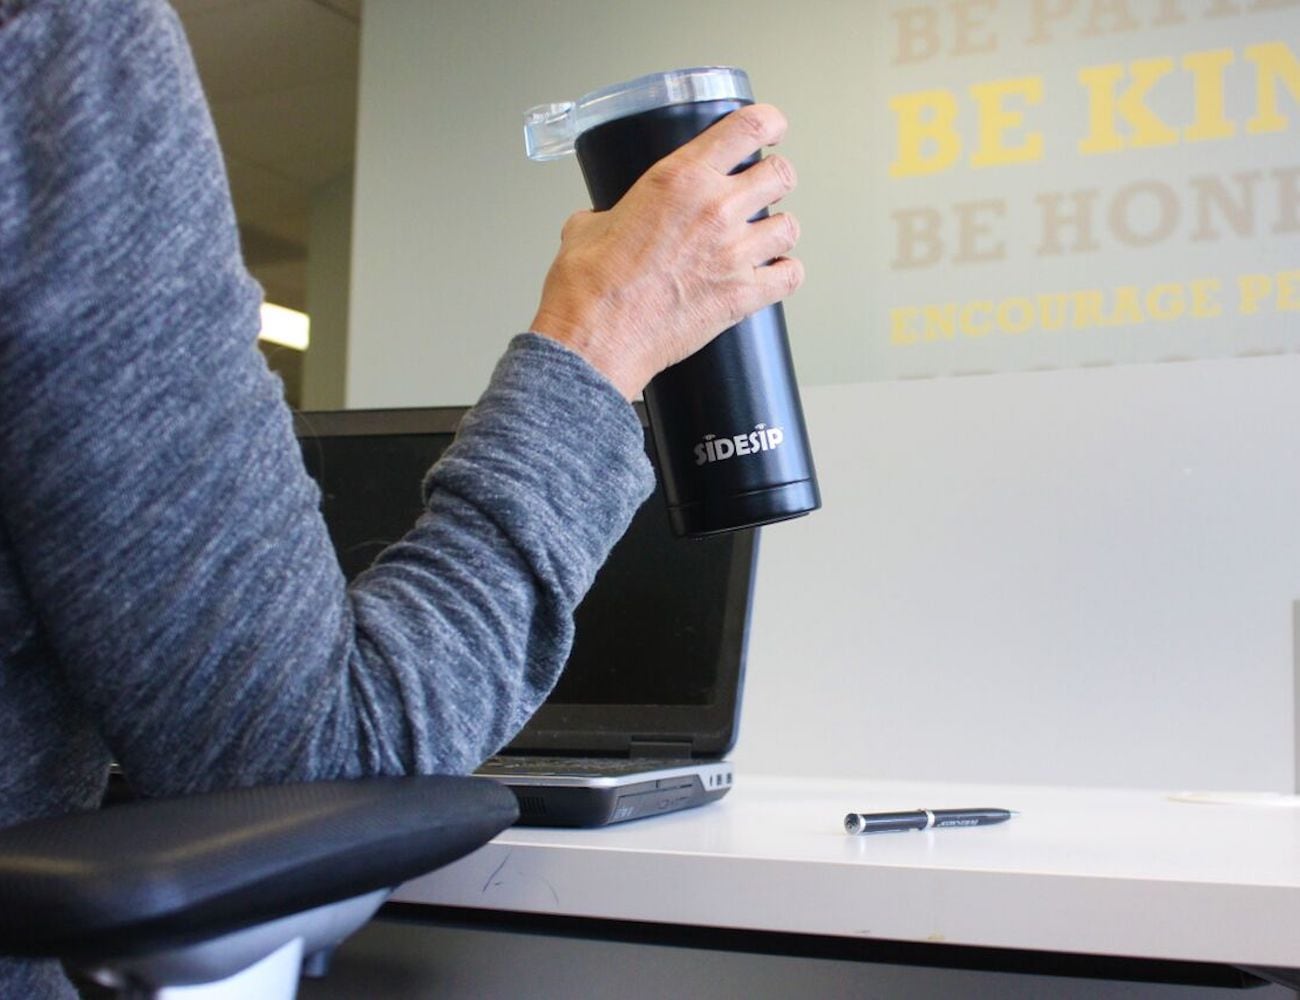 Sidesip safe travel drink container allows you to drink and sip safely